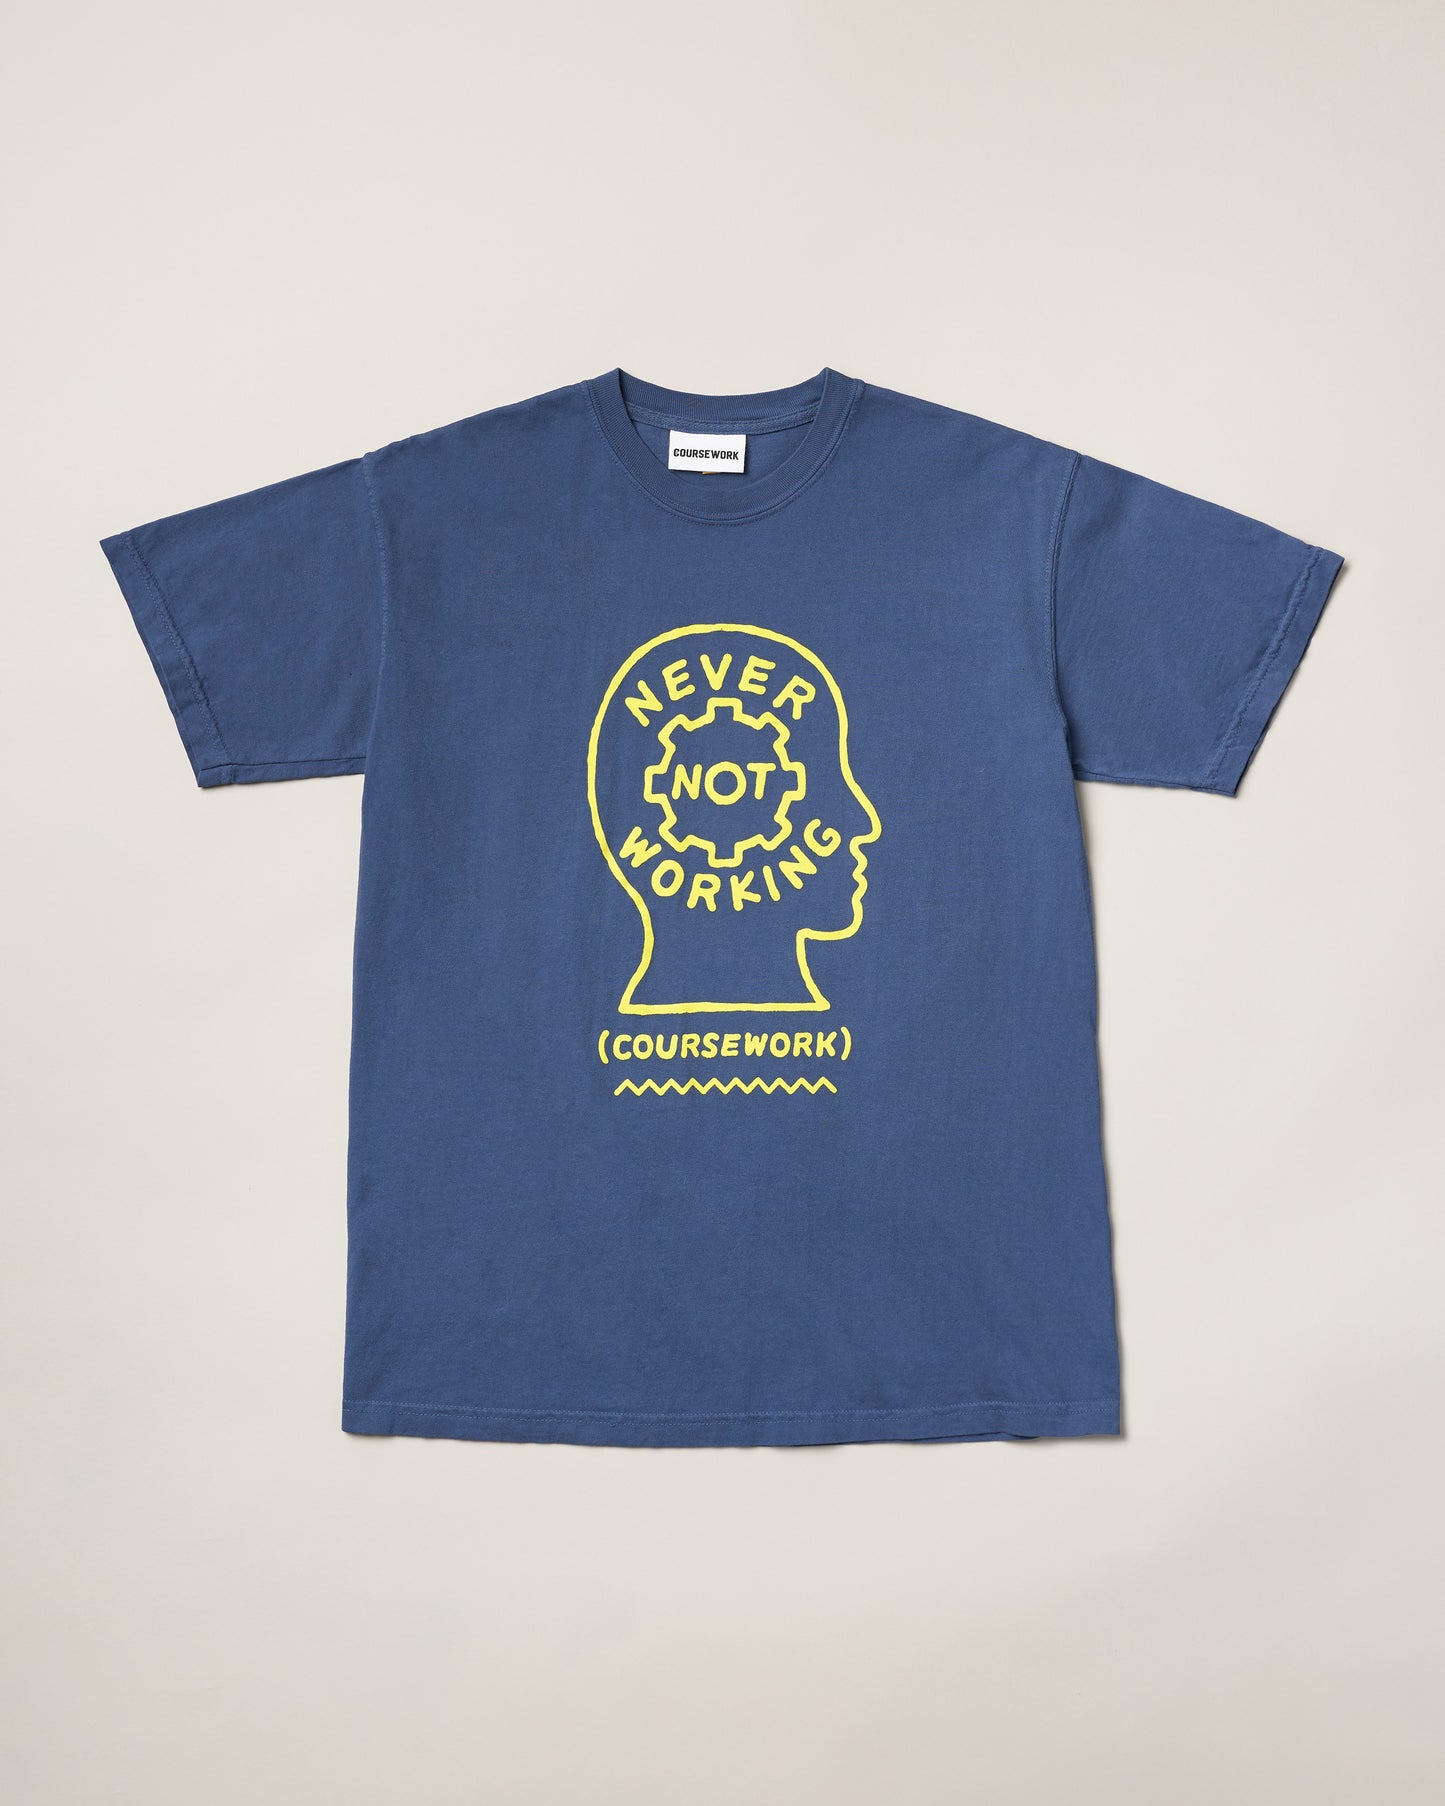 Never Not Working Tee - Blue